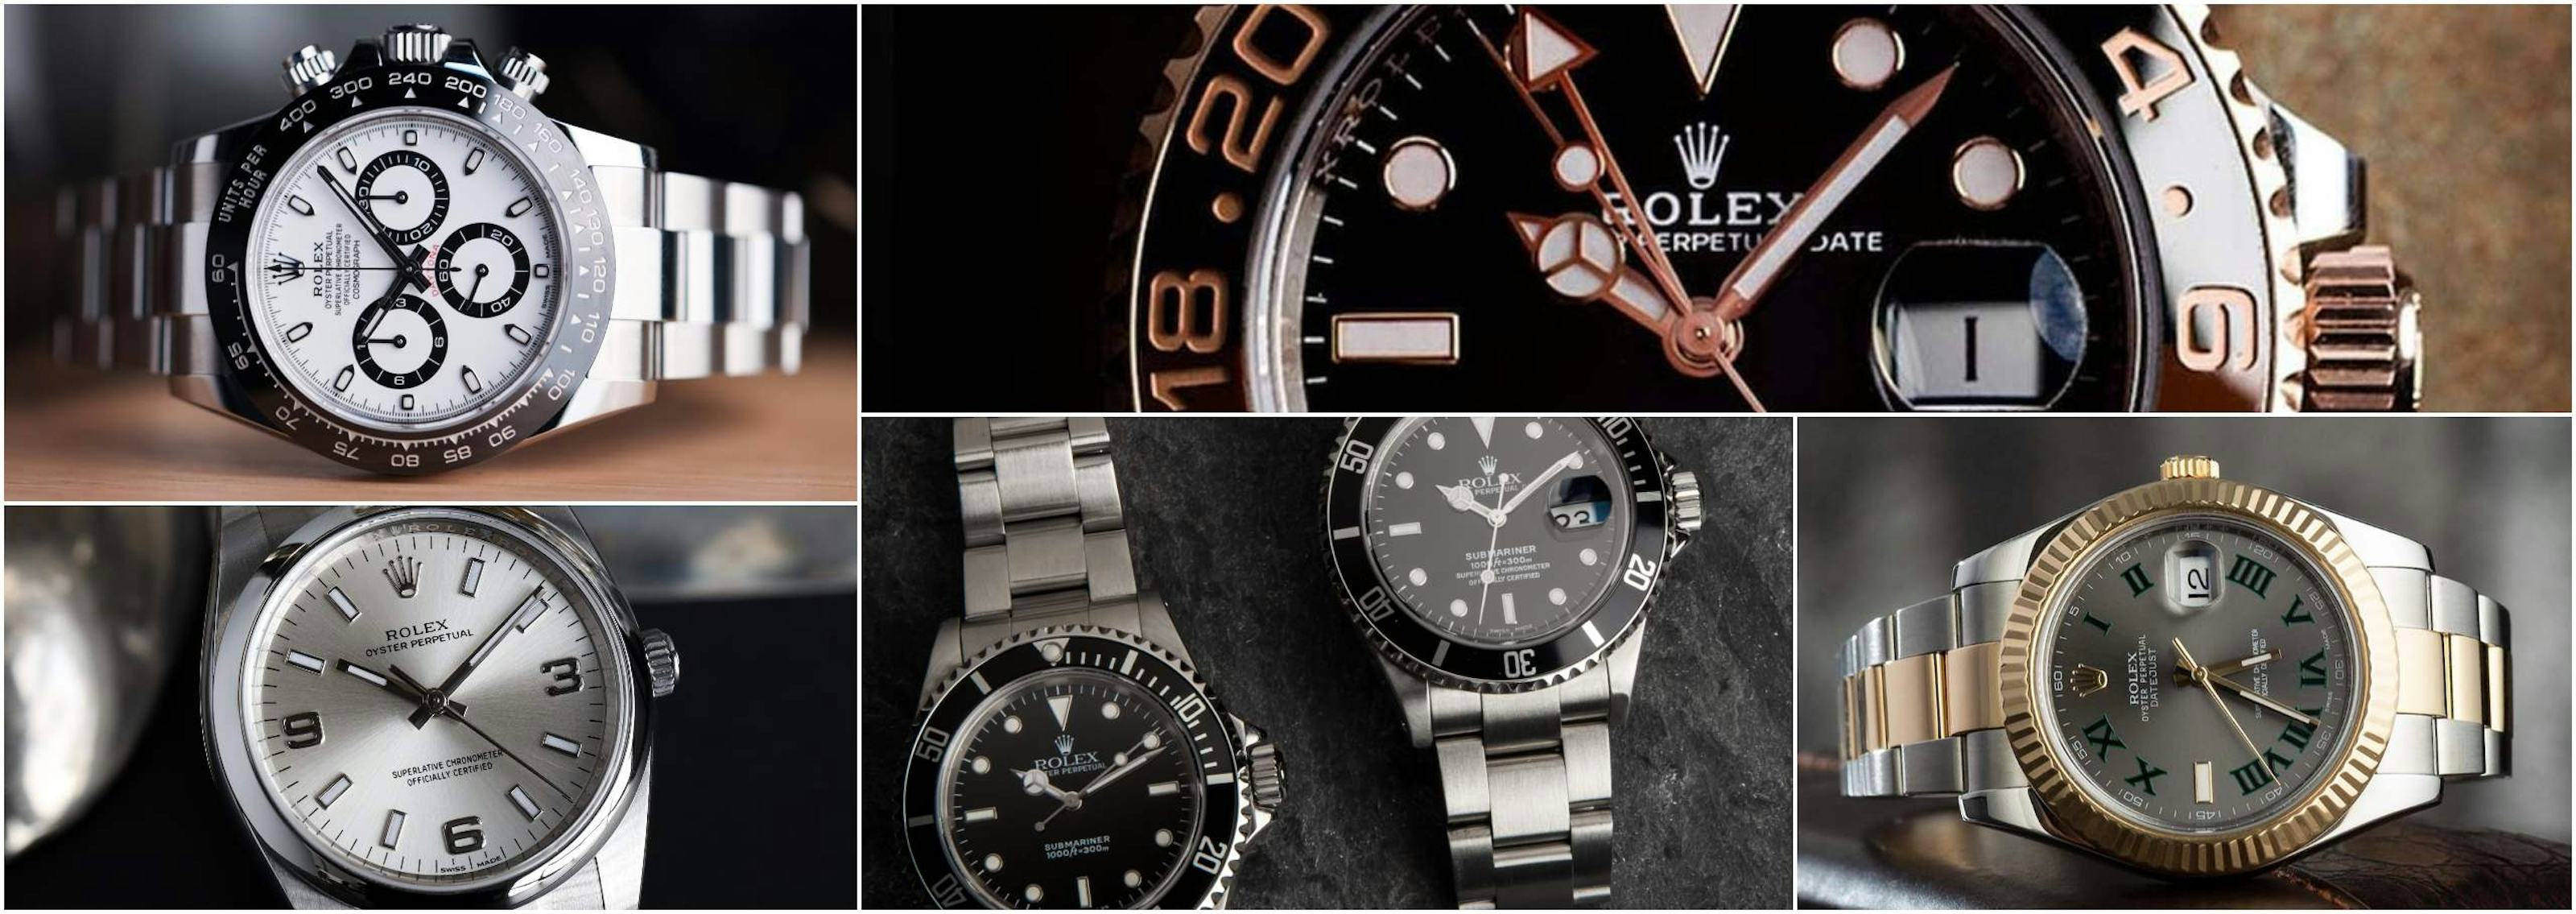 A History of Rolex Innovations